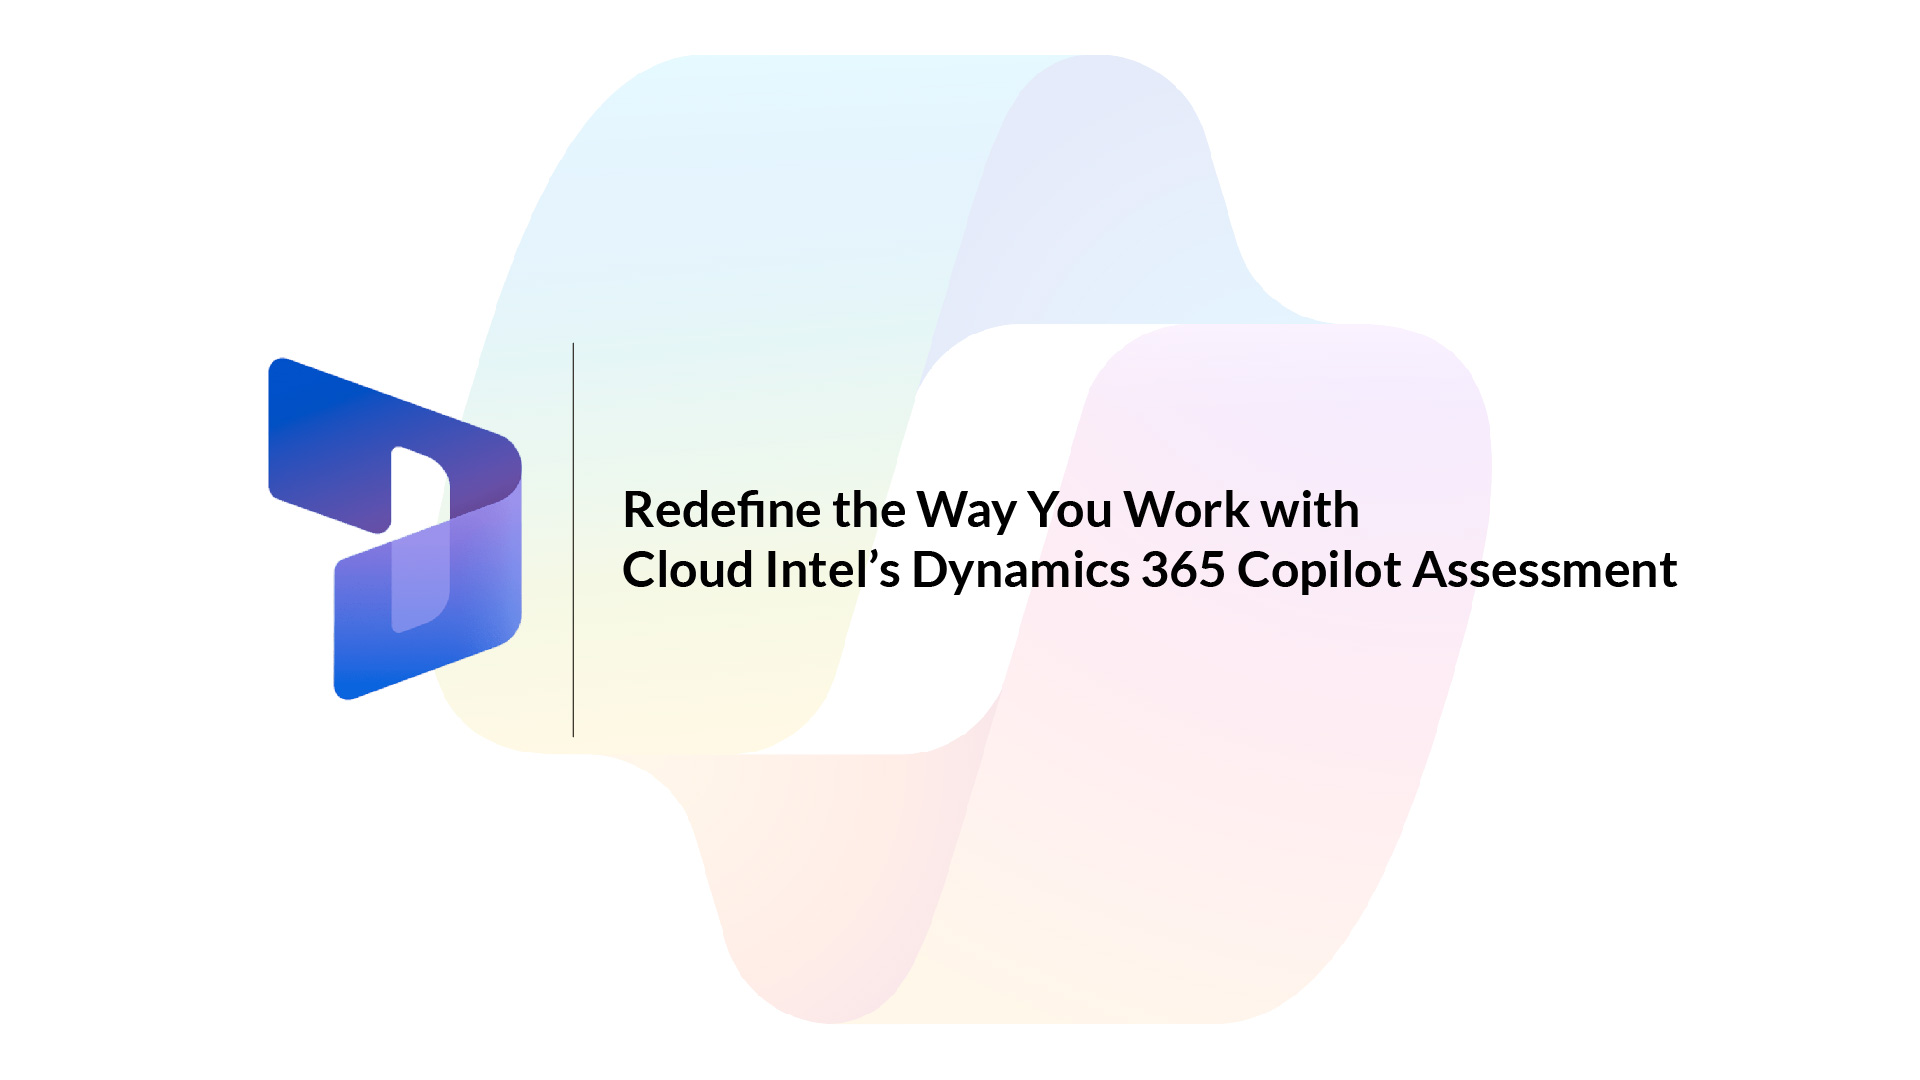 Redefine the Way You Work with Cloud Intel’s Dynamics 365 Copilot Assessment-Click2Cloud